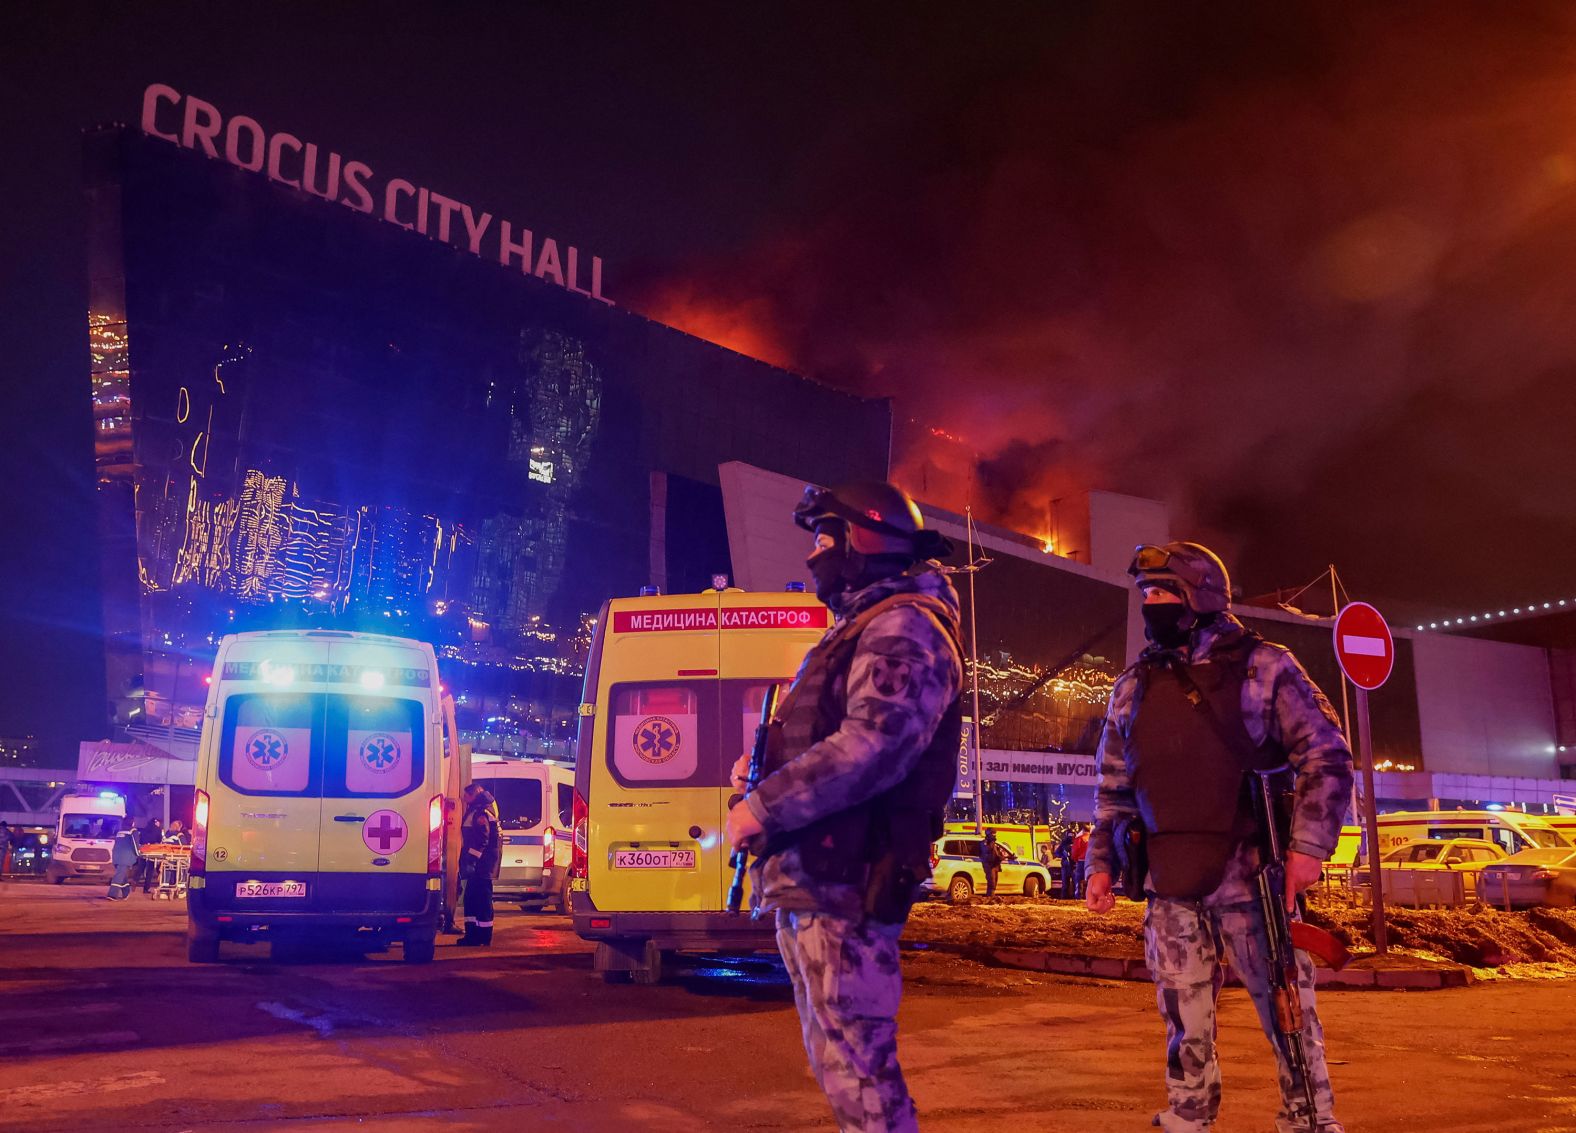 Law enforcement officers stand guard near the burning Crocus City Hall concert venue after a <a href="index.php?page=&url=https%3A%2F%2Fwww.cnn.com%2F2024%2F03%2F25%2Feurope%2Frussia-moscow-concert-attack-suspects-court-intl%2Findex.html" target="_blank">terrorist attack in Moscow</a> on Friday, March 22. ISIS has claimed responsibility for the massacre, which saw armed assailants storm the complex, killing at least 139 people. Nearly a dozen people have been detained in connection with the attack, according to authorities.